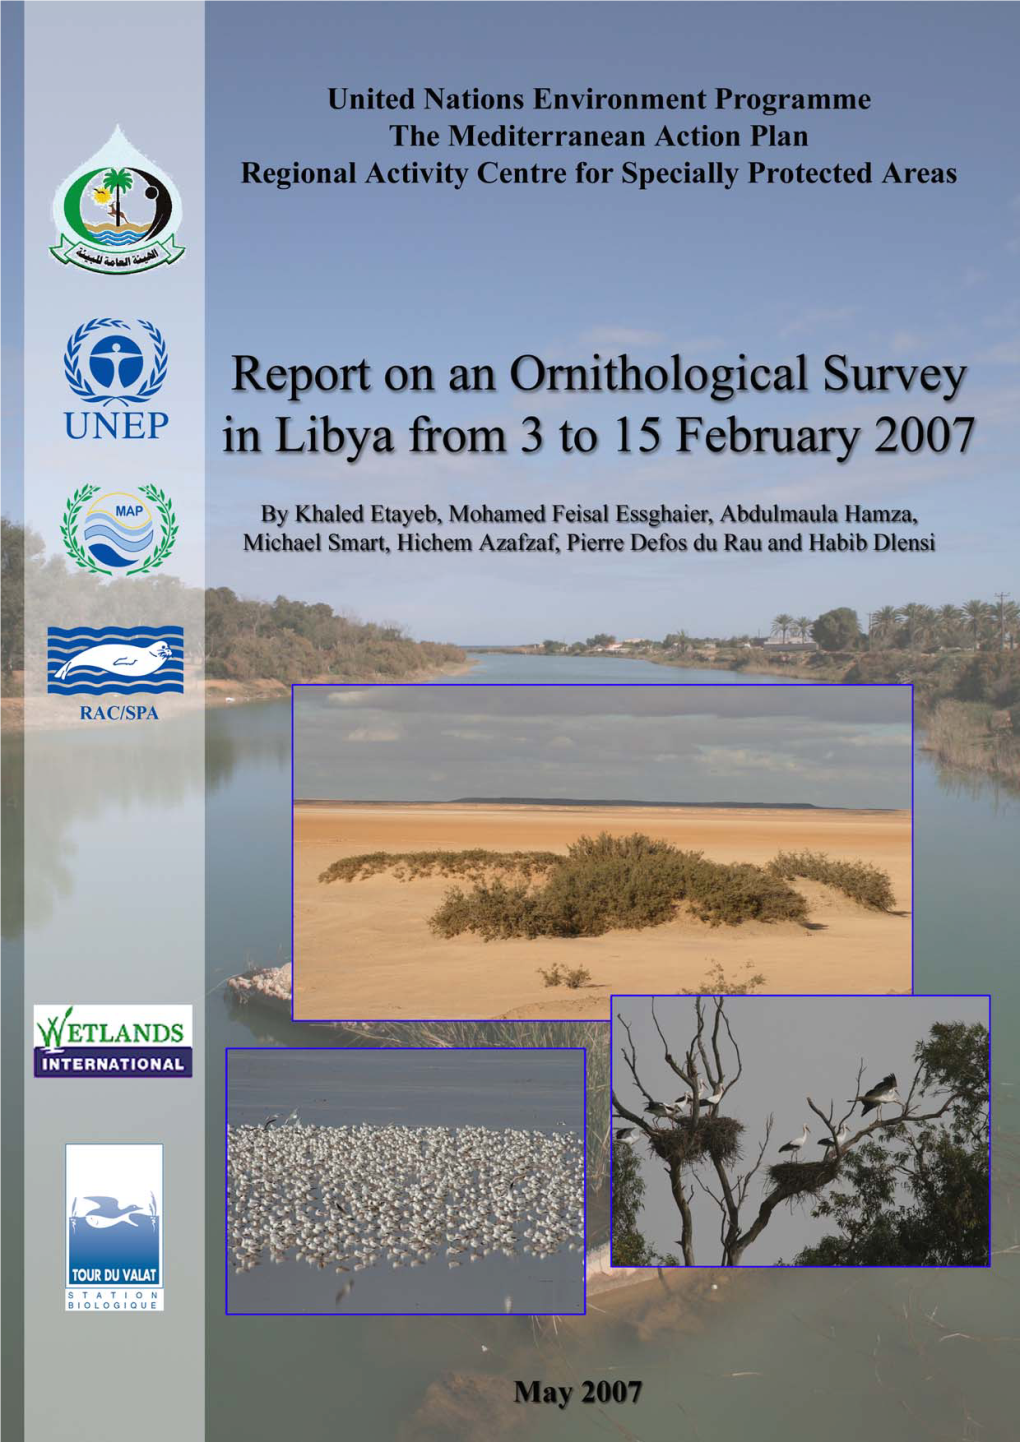 Wetlands and Wintering Waterbirds in Libya, January 2005 and 2006